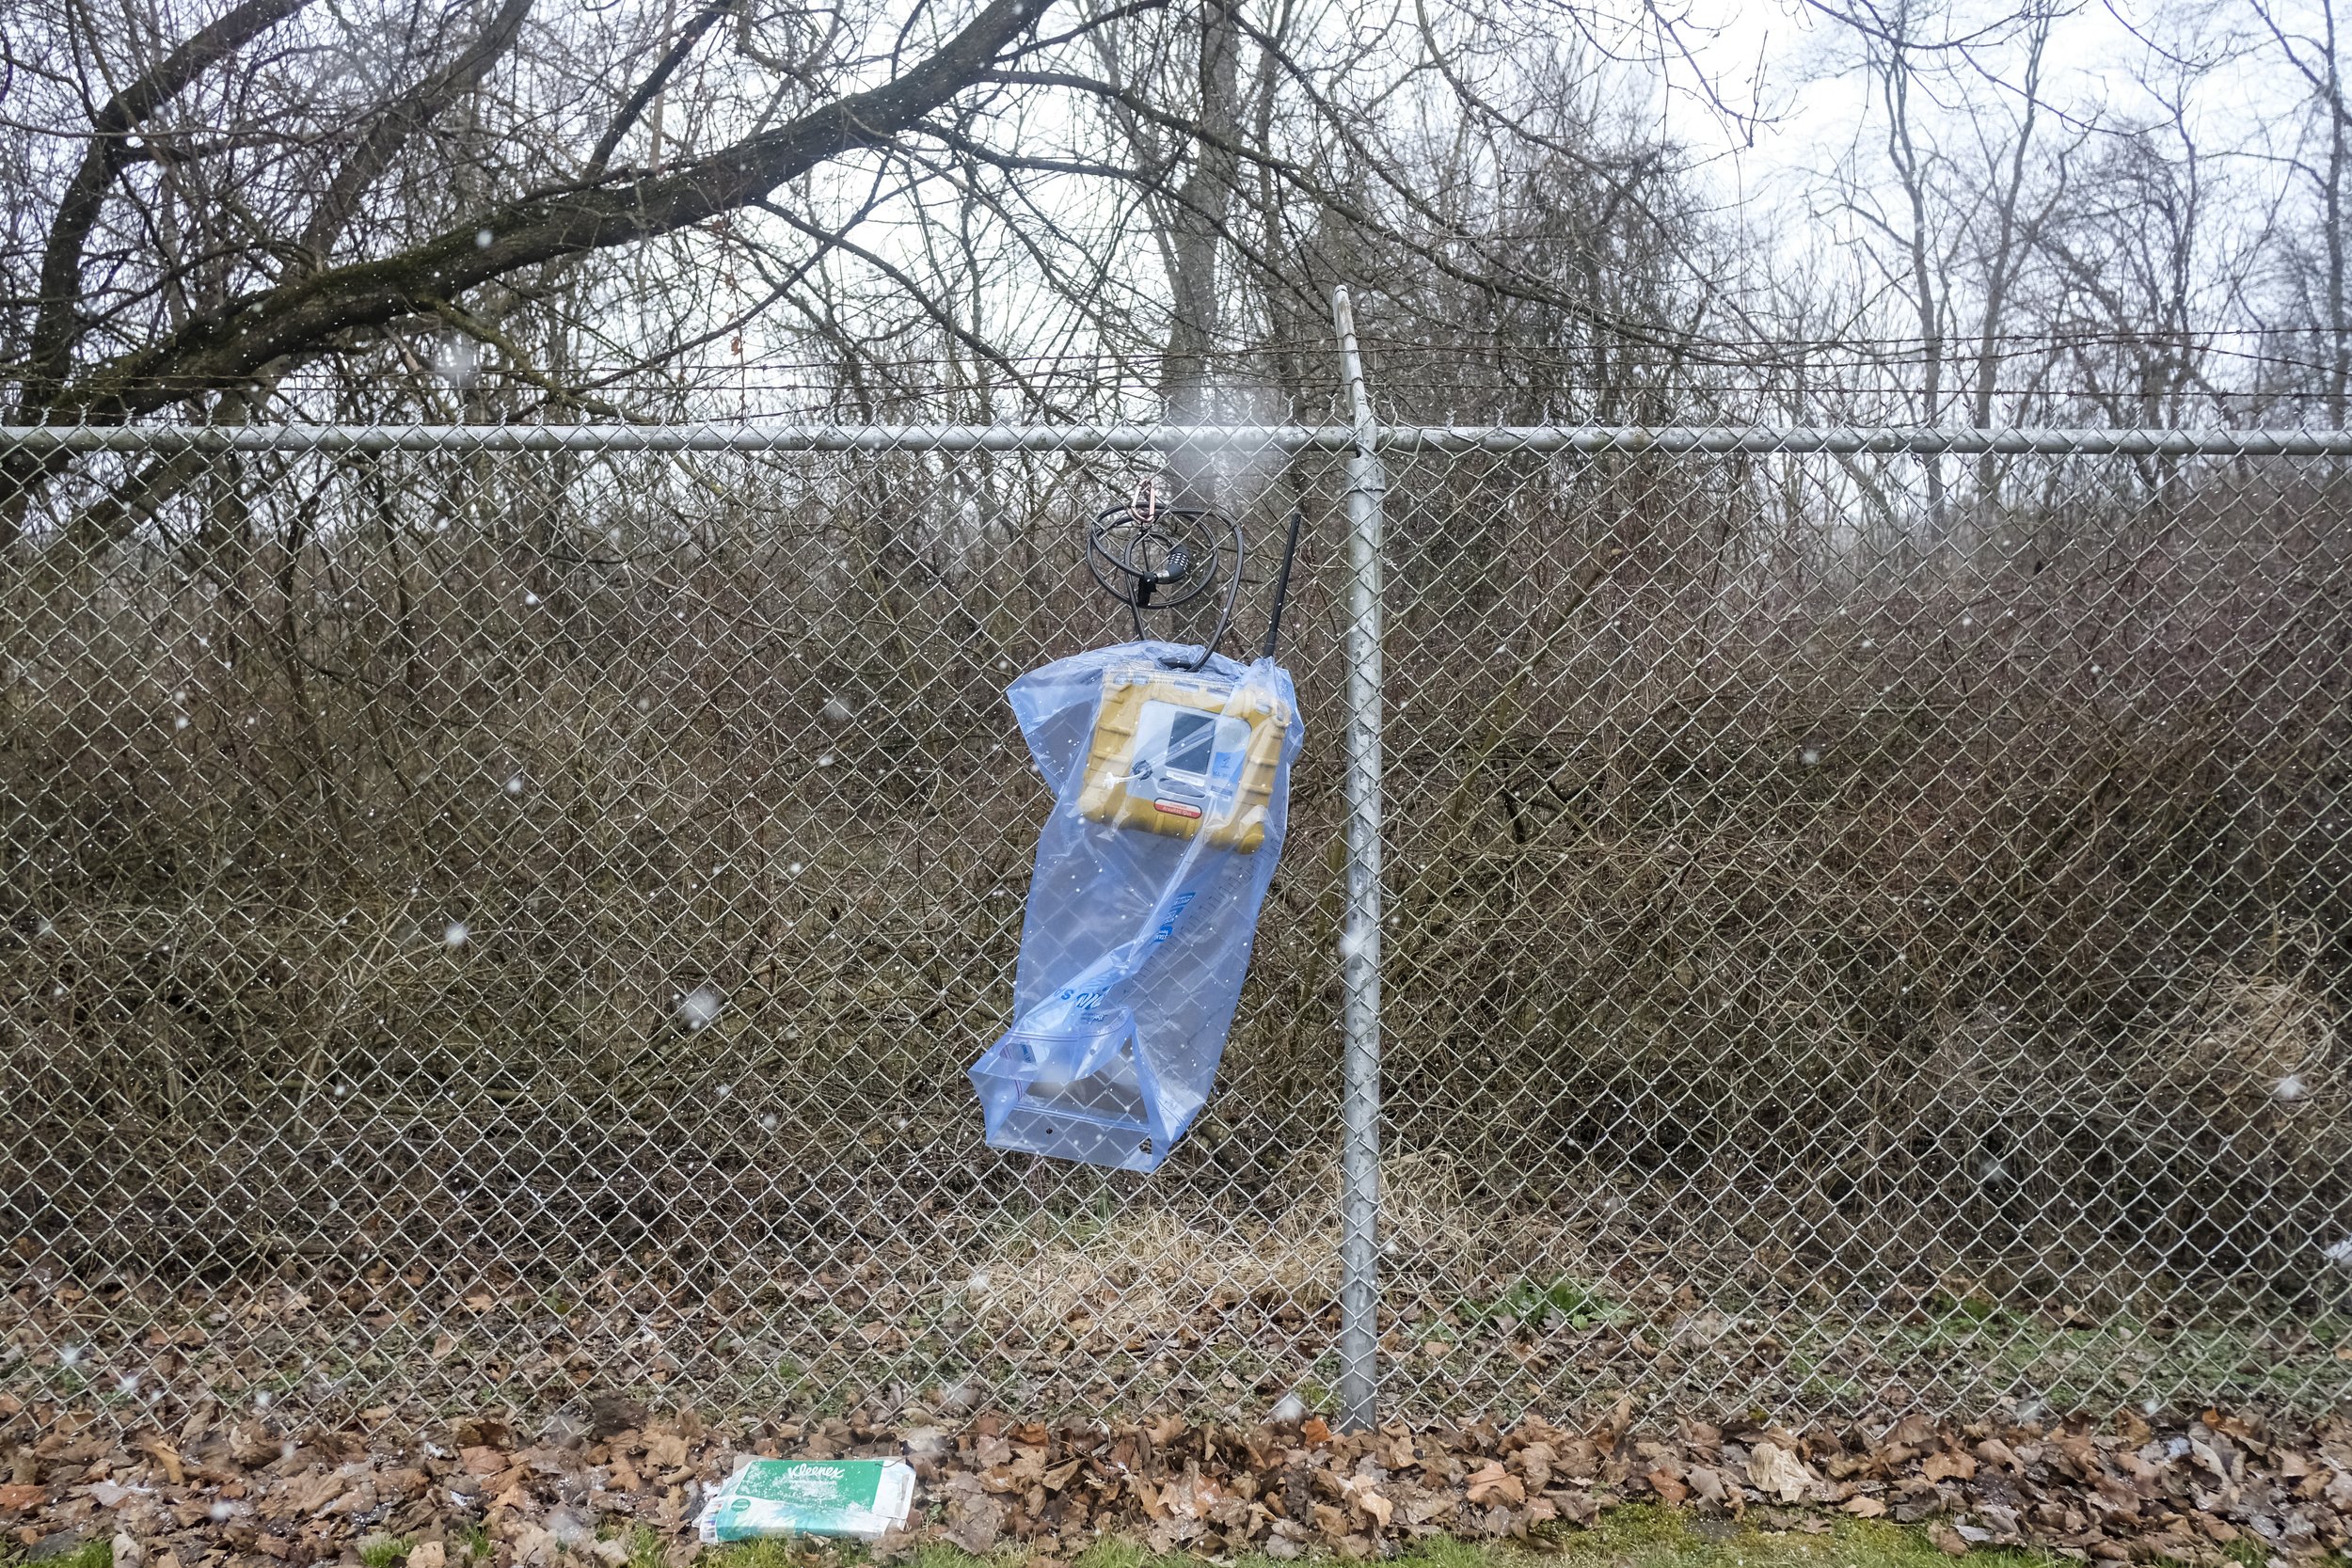  An Environmental Protection Agency air monitoring device is secured to a fence on East Martin Street which runs parallel to the Norfolk Southern train crash site in East Palestine, Ohio on Friday, February 17, 2023. The EPA has placed air monitoring